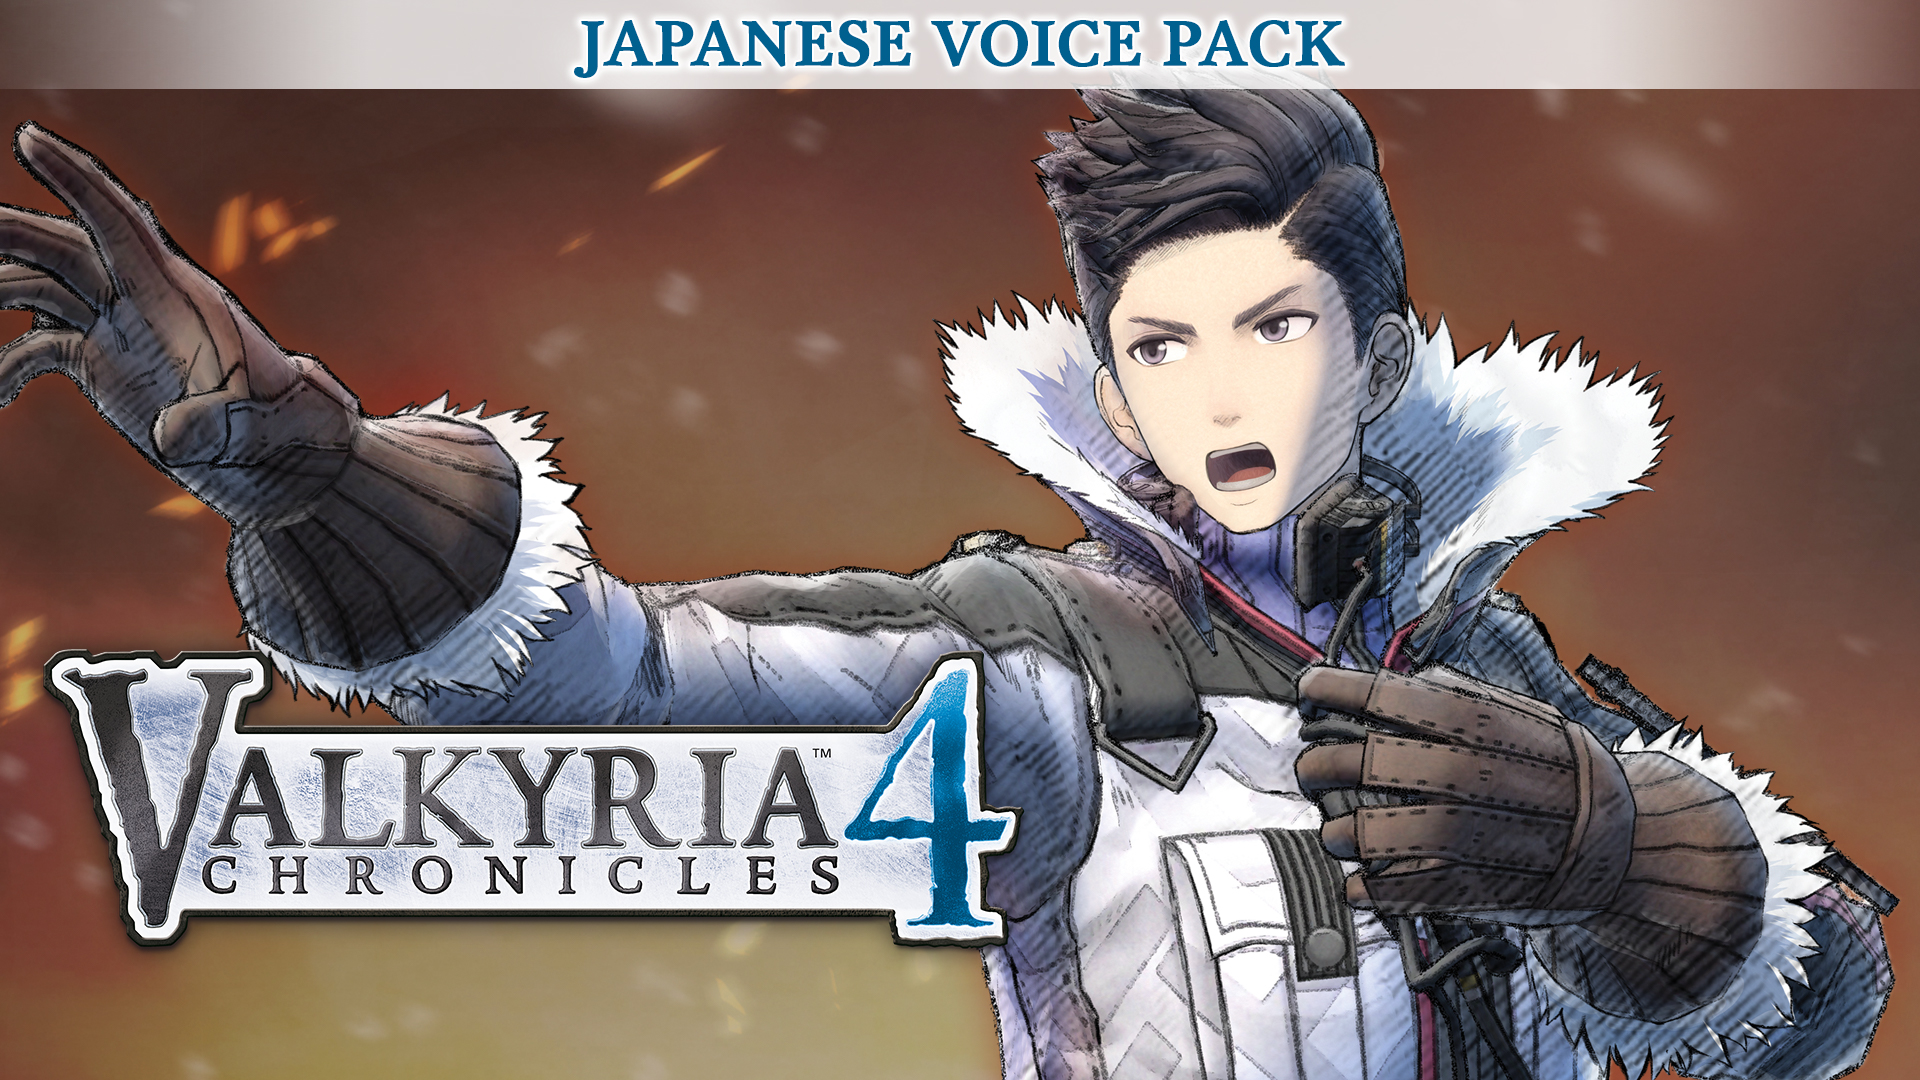 Valkyria Chronicles 4: Japanese Voice Pack